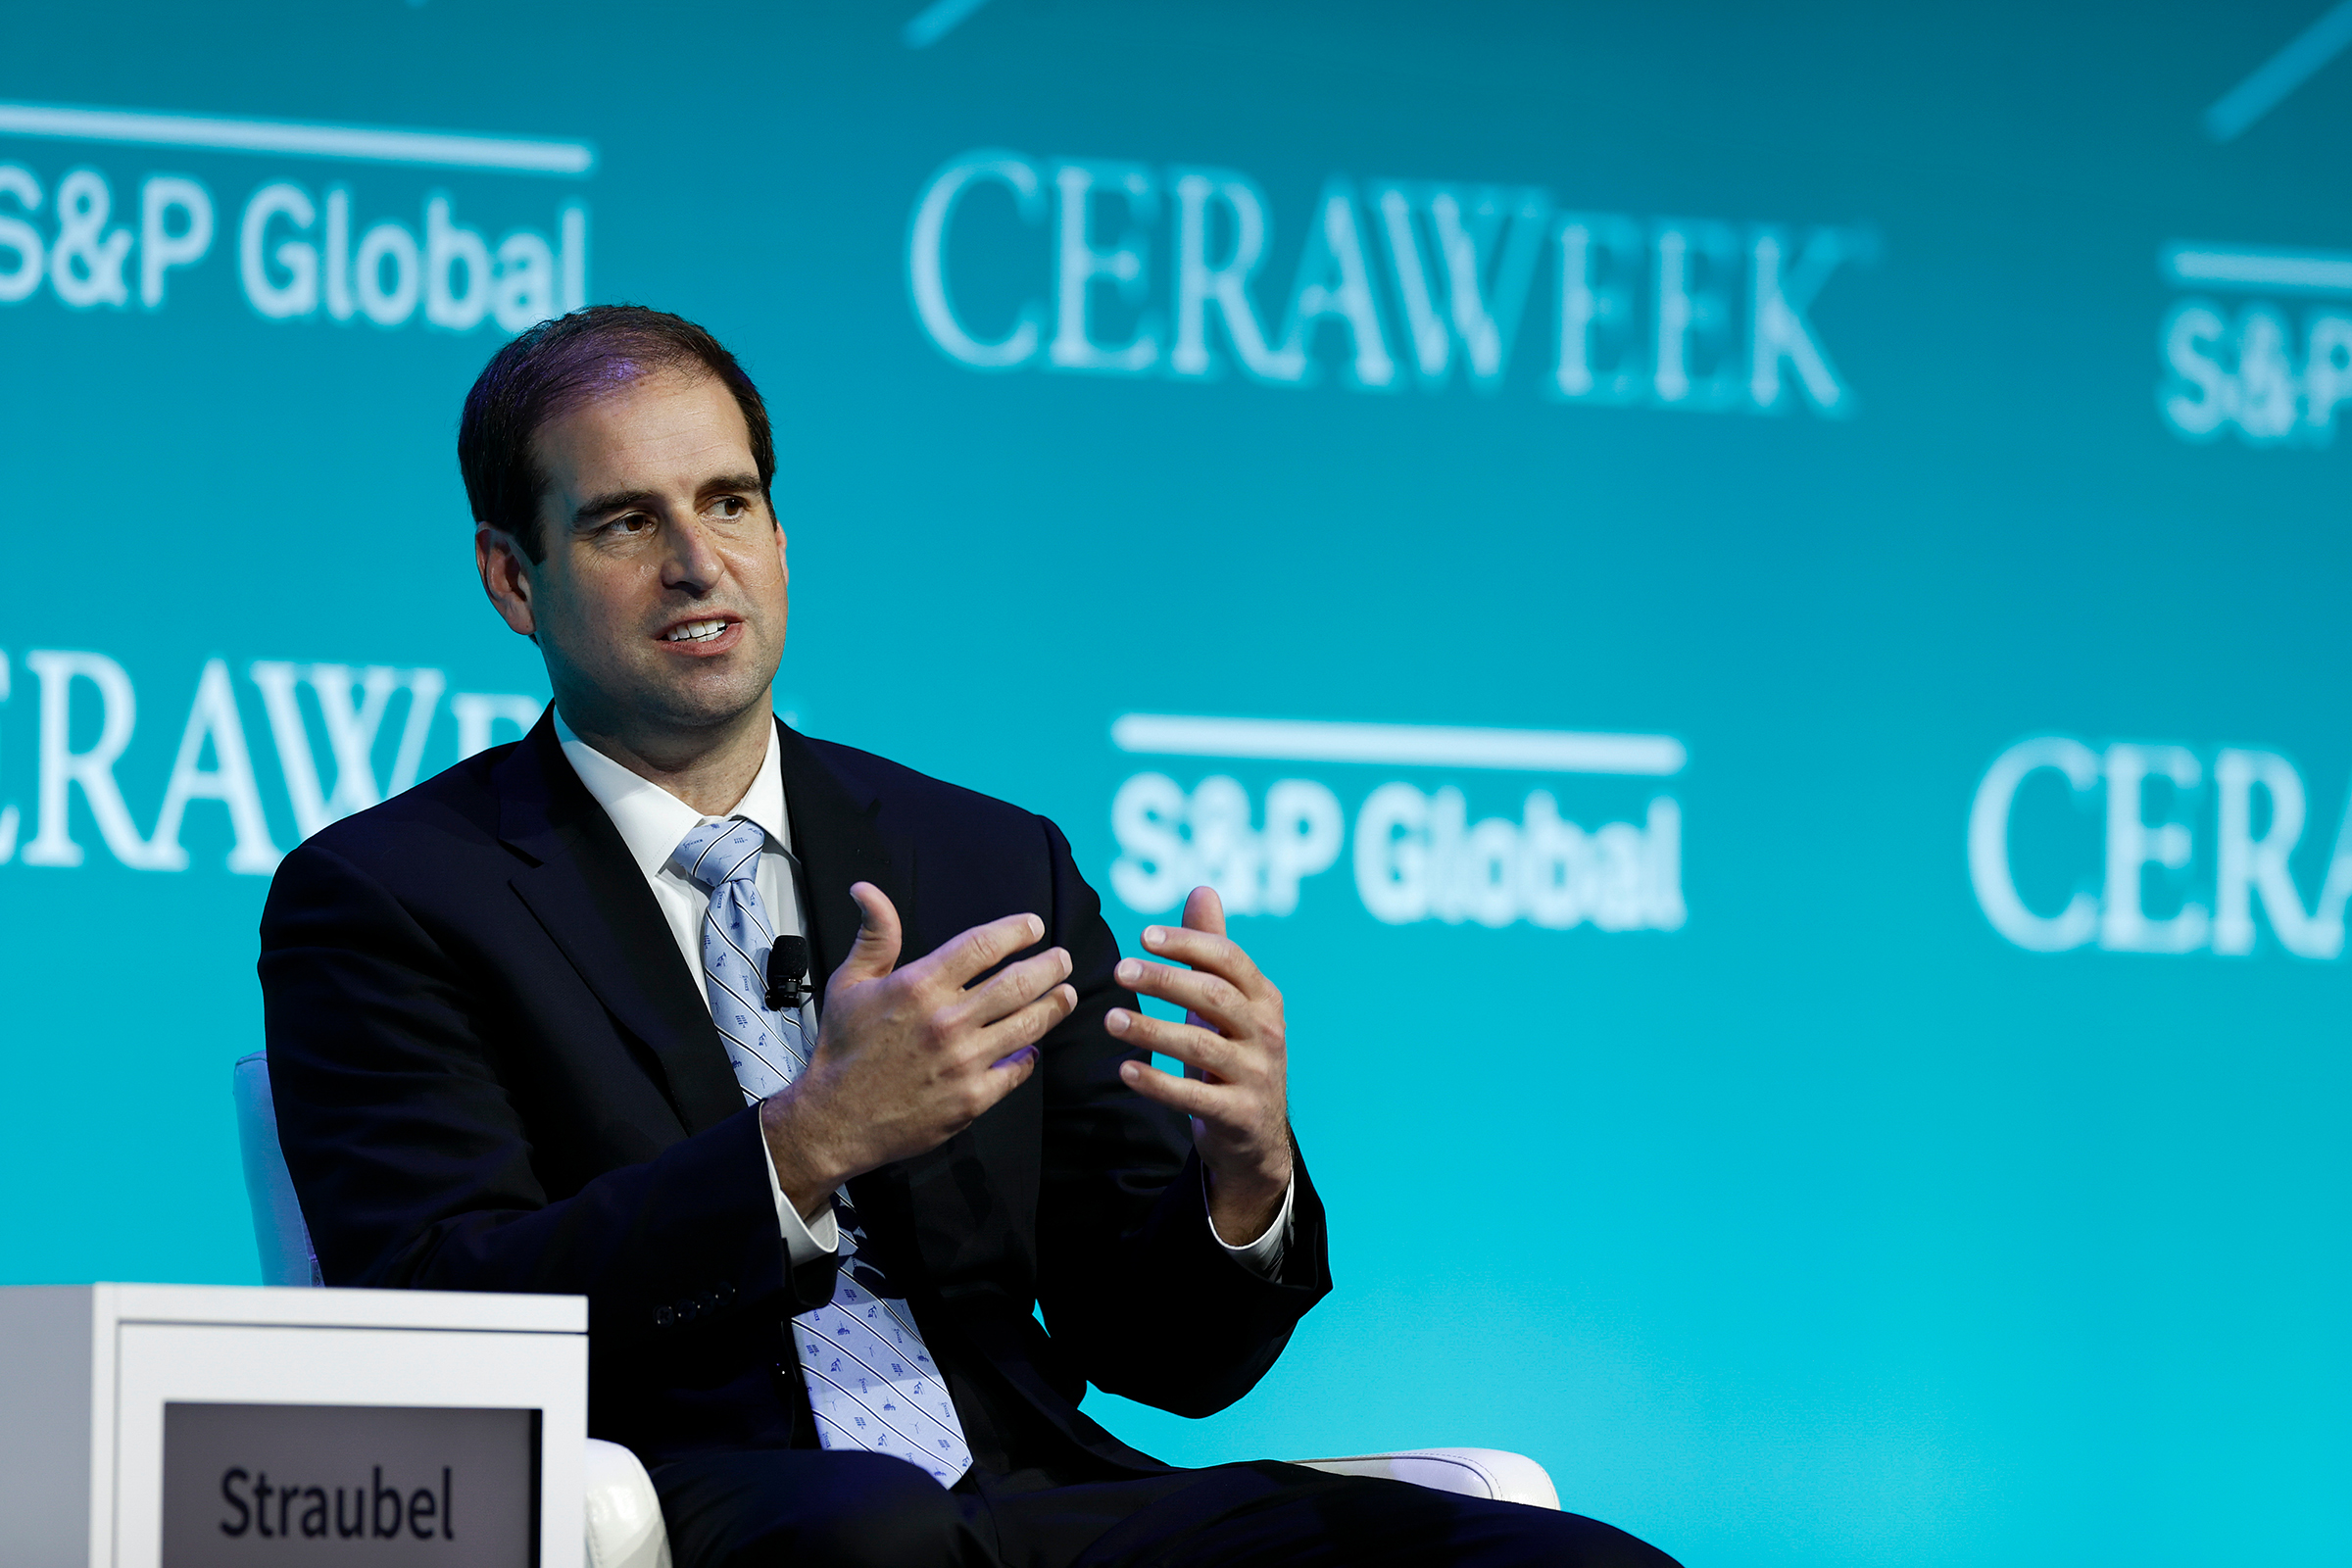 JB Straubel, co-founder and chief executive officer of Redwood Materials Inc., speaks during the 2022 CERAWeek by S&P Global conference in Houston, Texas, U.S., on Thursday, March 10, 2022. (Aaron M. Sprecher—Bloomberg/Getty Images)